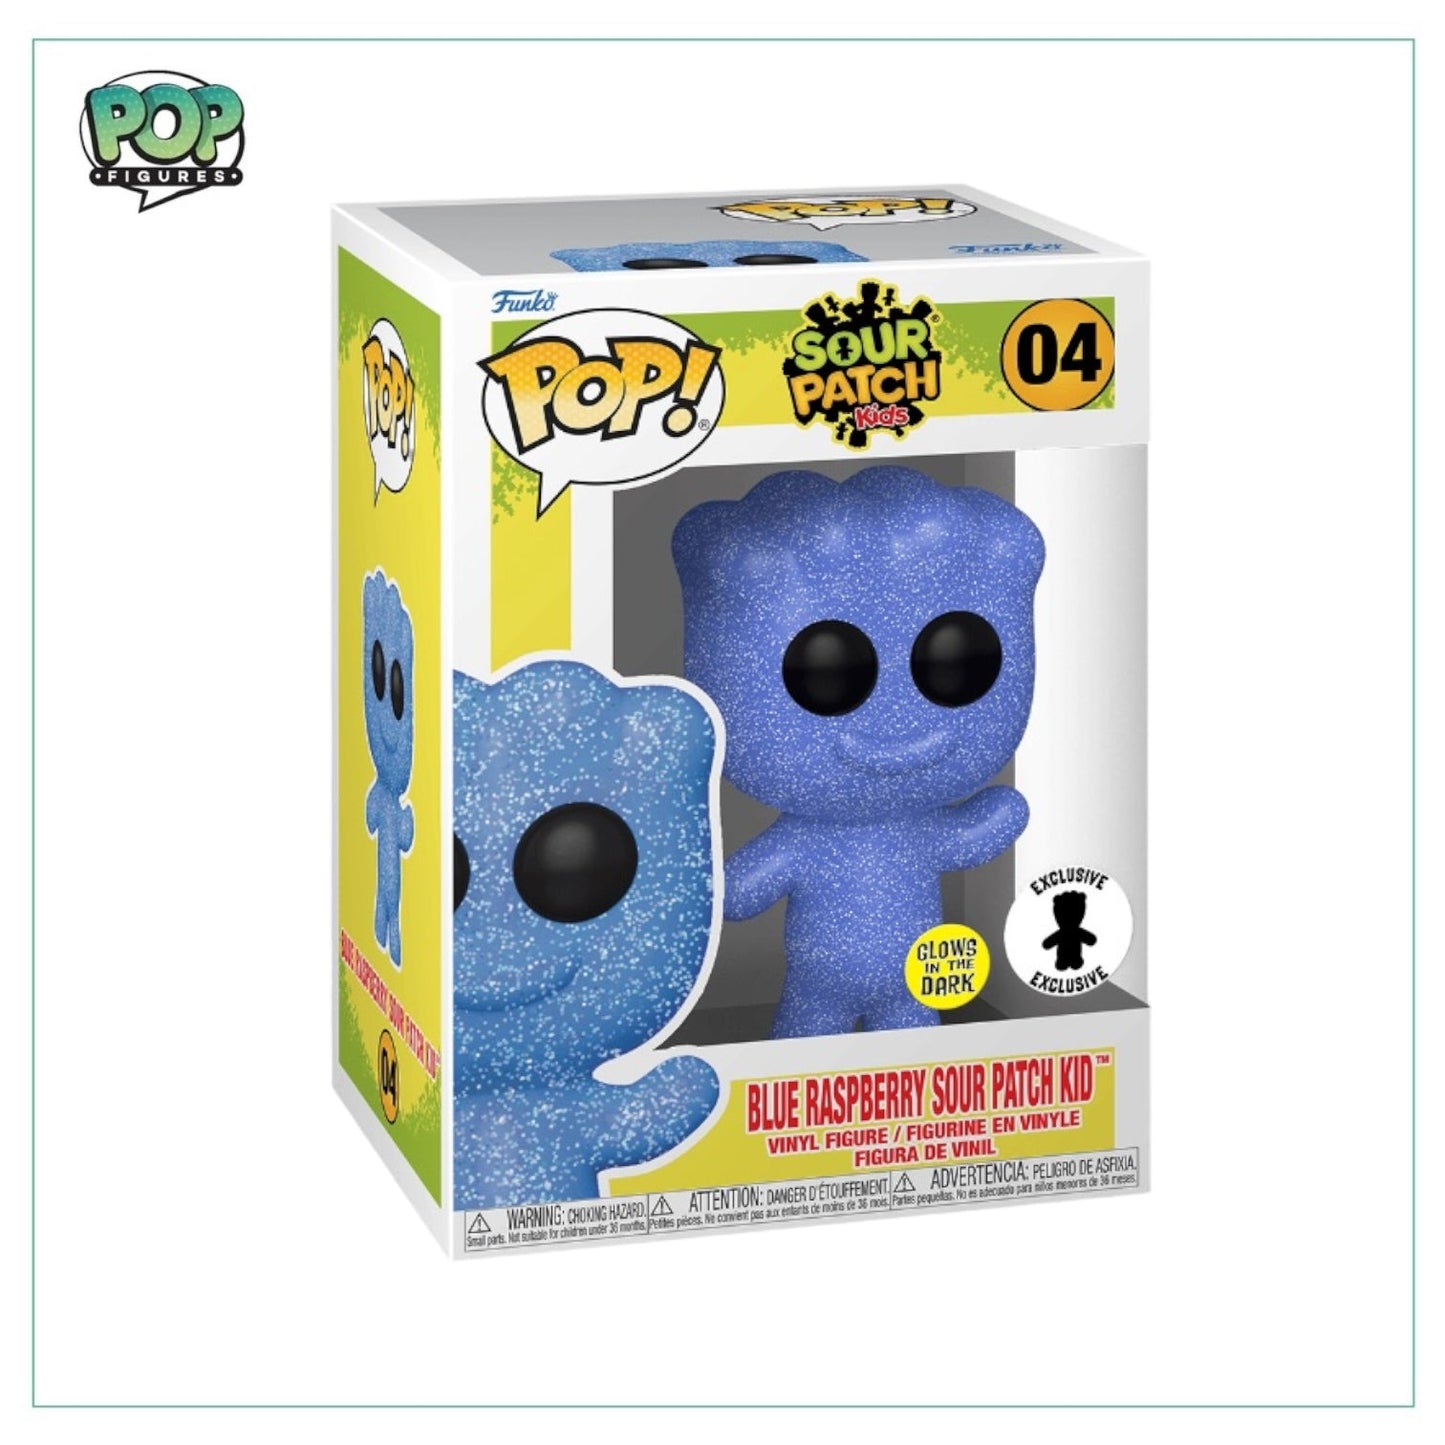 Blue Raspberry Sour Patch Kid #04 (Glow in the dark) Funko Pop! - Sour Patch Kids - IT'SUGAR Exclusive - Angry Cat